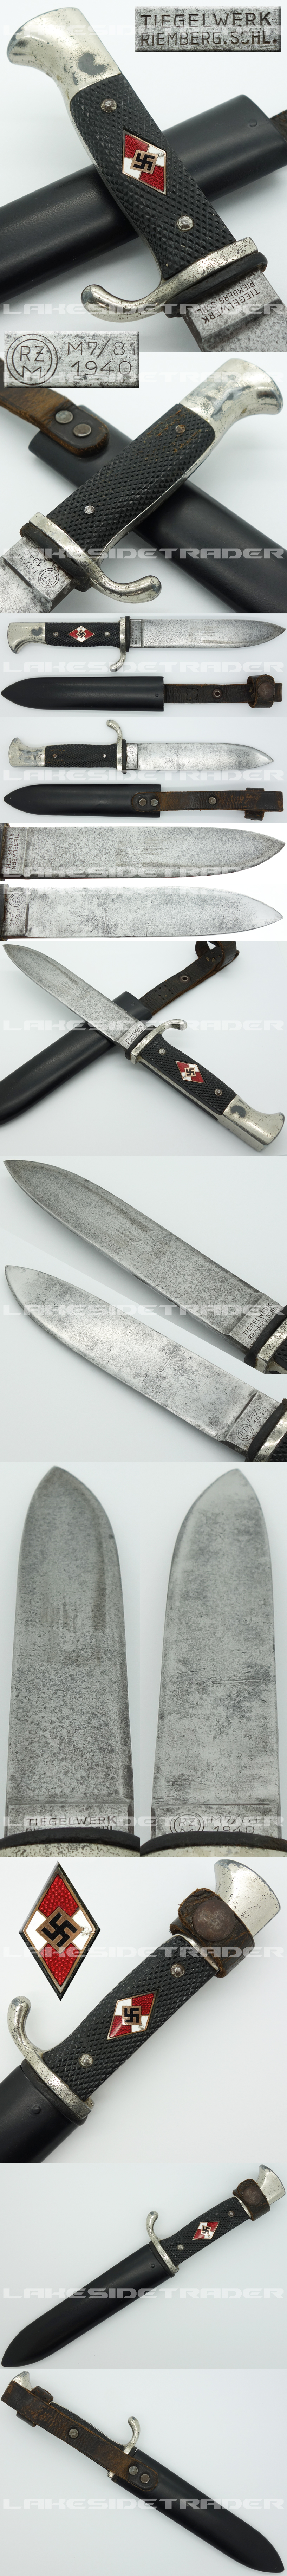 Transitional Hitler Youth Knife by Tiegelwerk